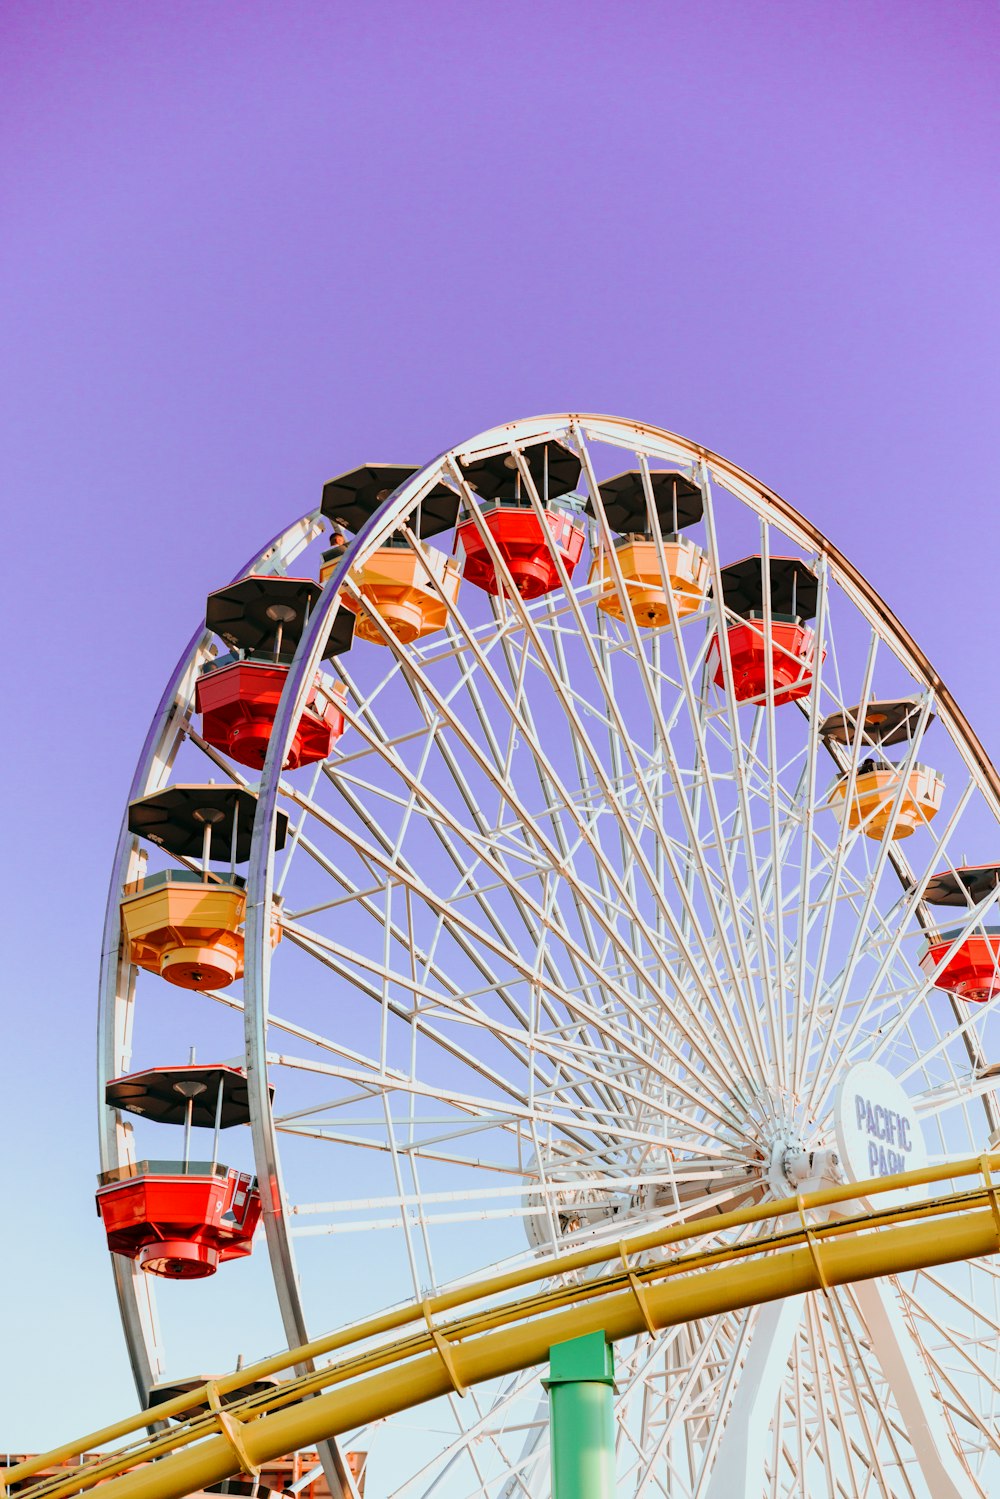 a ferris wheel with red and black seats